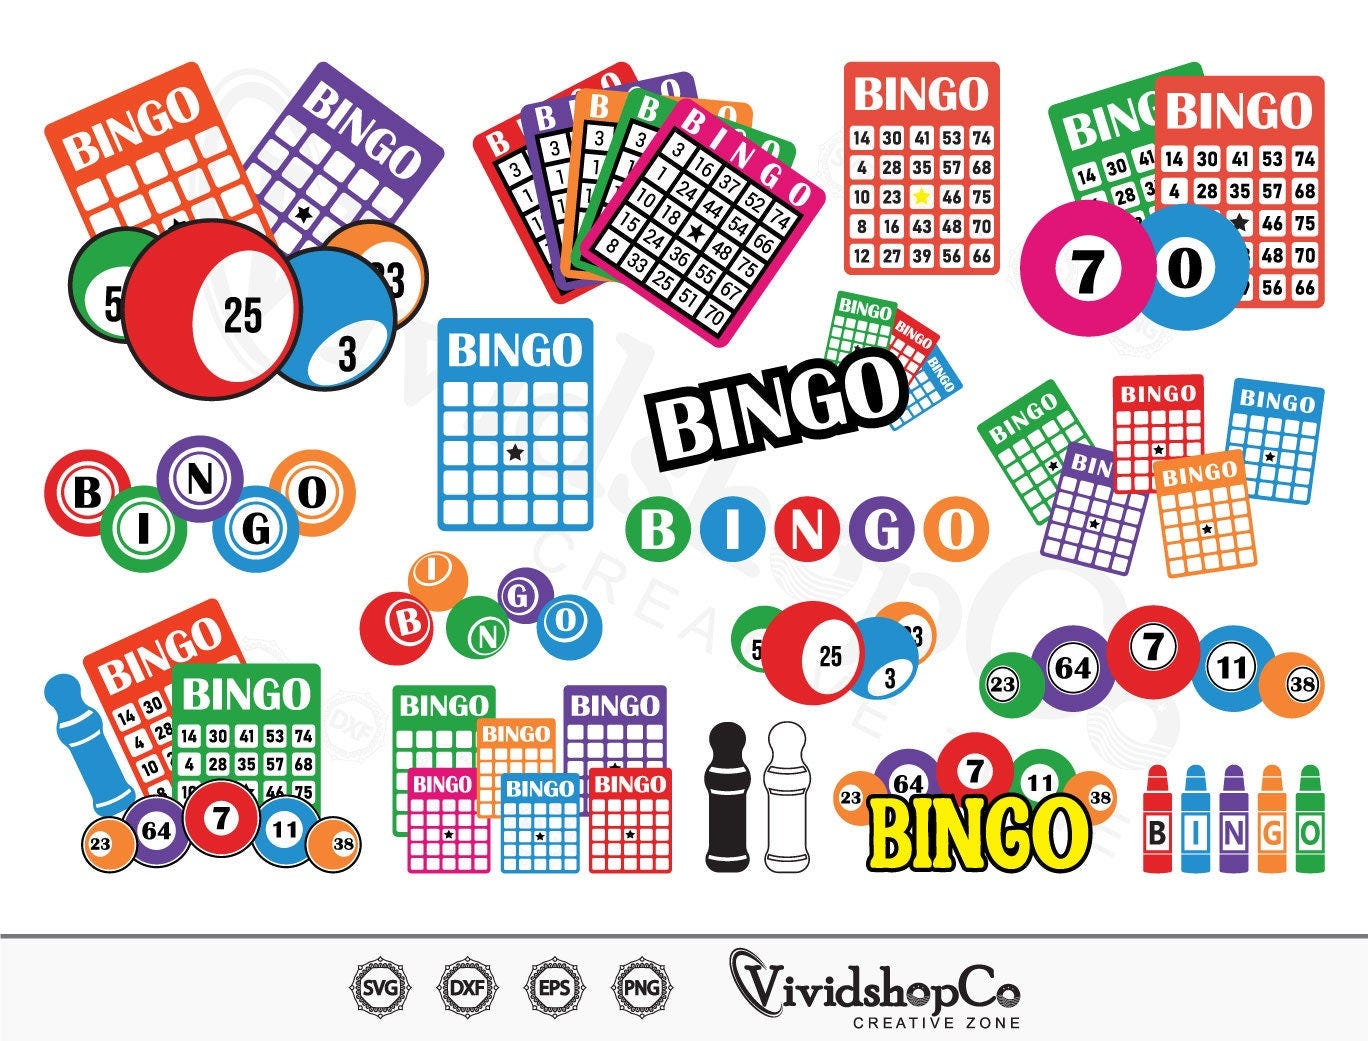 Bingo SVG,  Bingo balls svg, Bingo card svg, Bingo Dauber svg, Bingo coloring svg, Cut file for silhouette, svg, eps, dxf, png, clipart